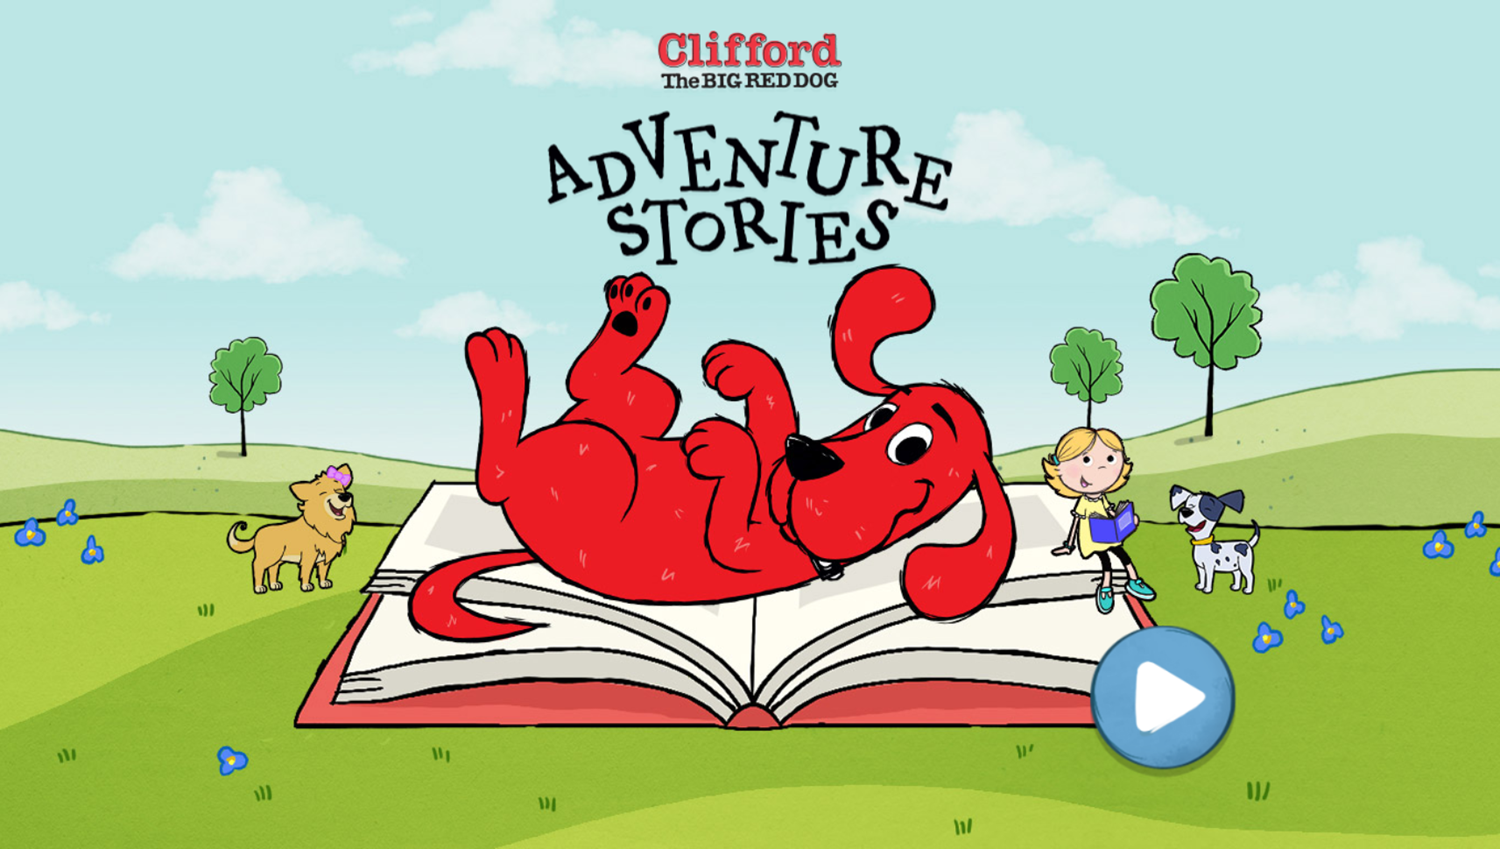 Clifford the Big Red Dog: Adventure Stories Welcome Screen Screenshot.